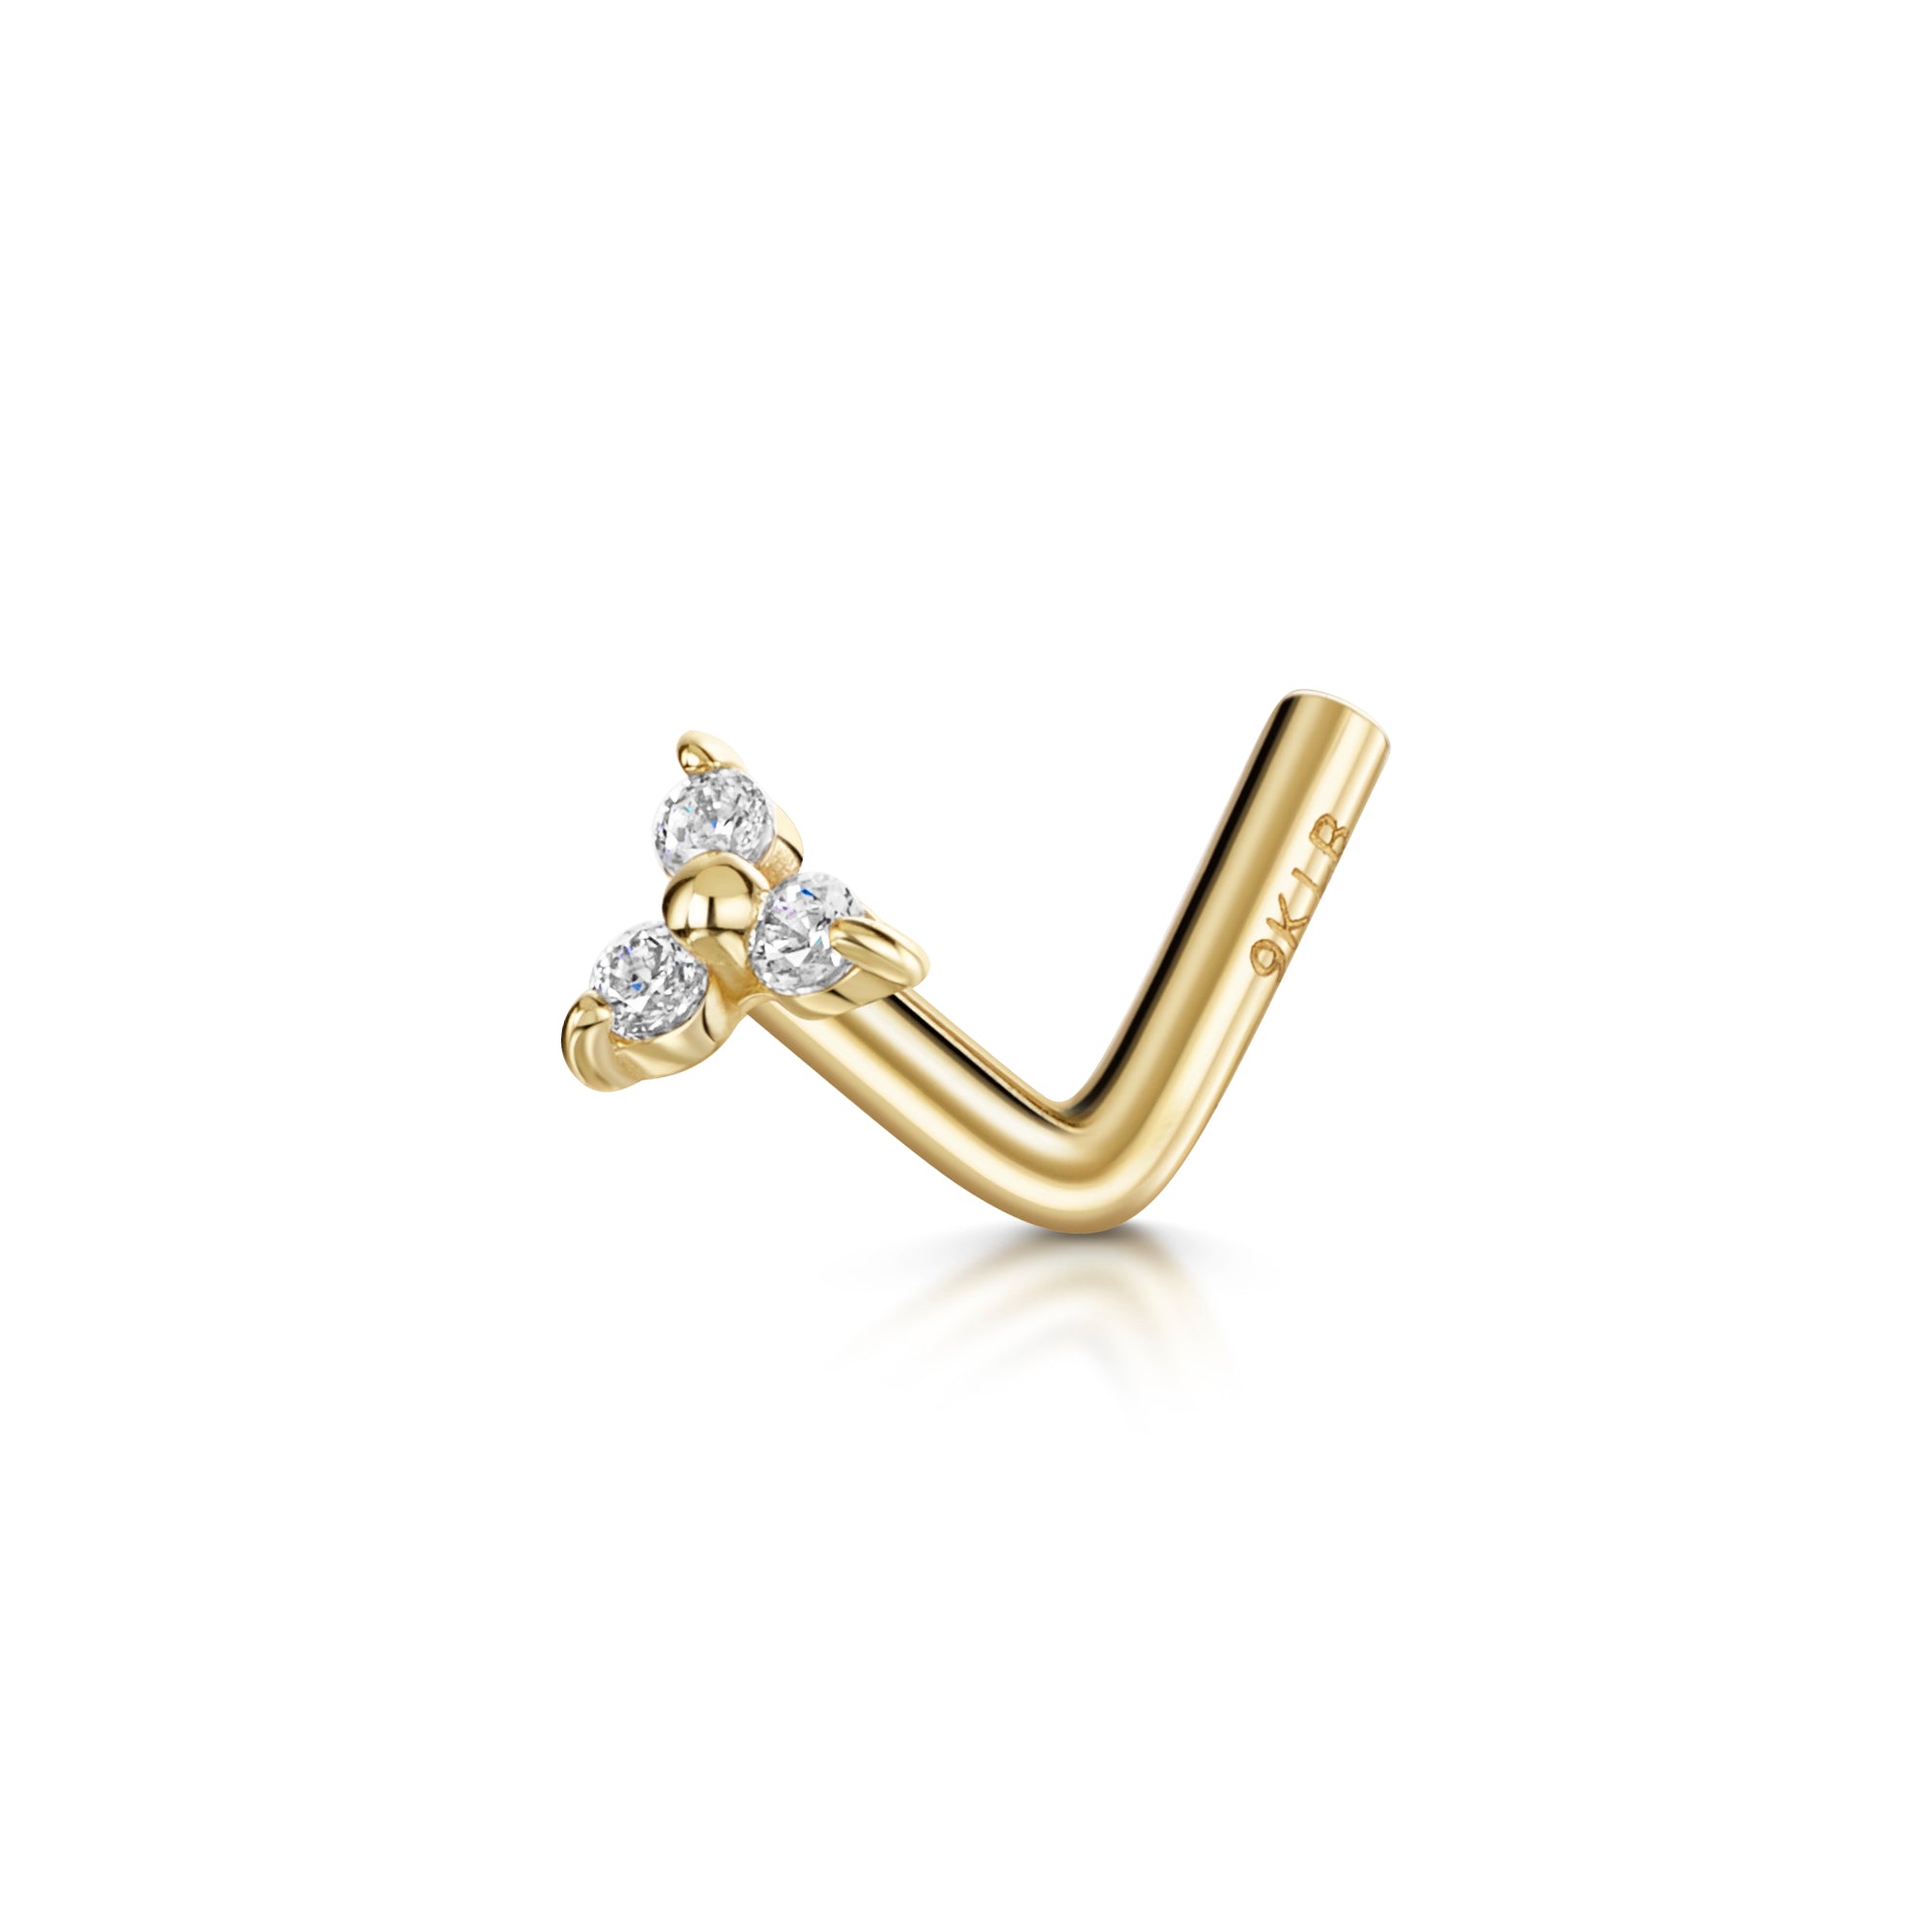 L-shaped flower 14K solid gold nose ring - RAWLondon